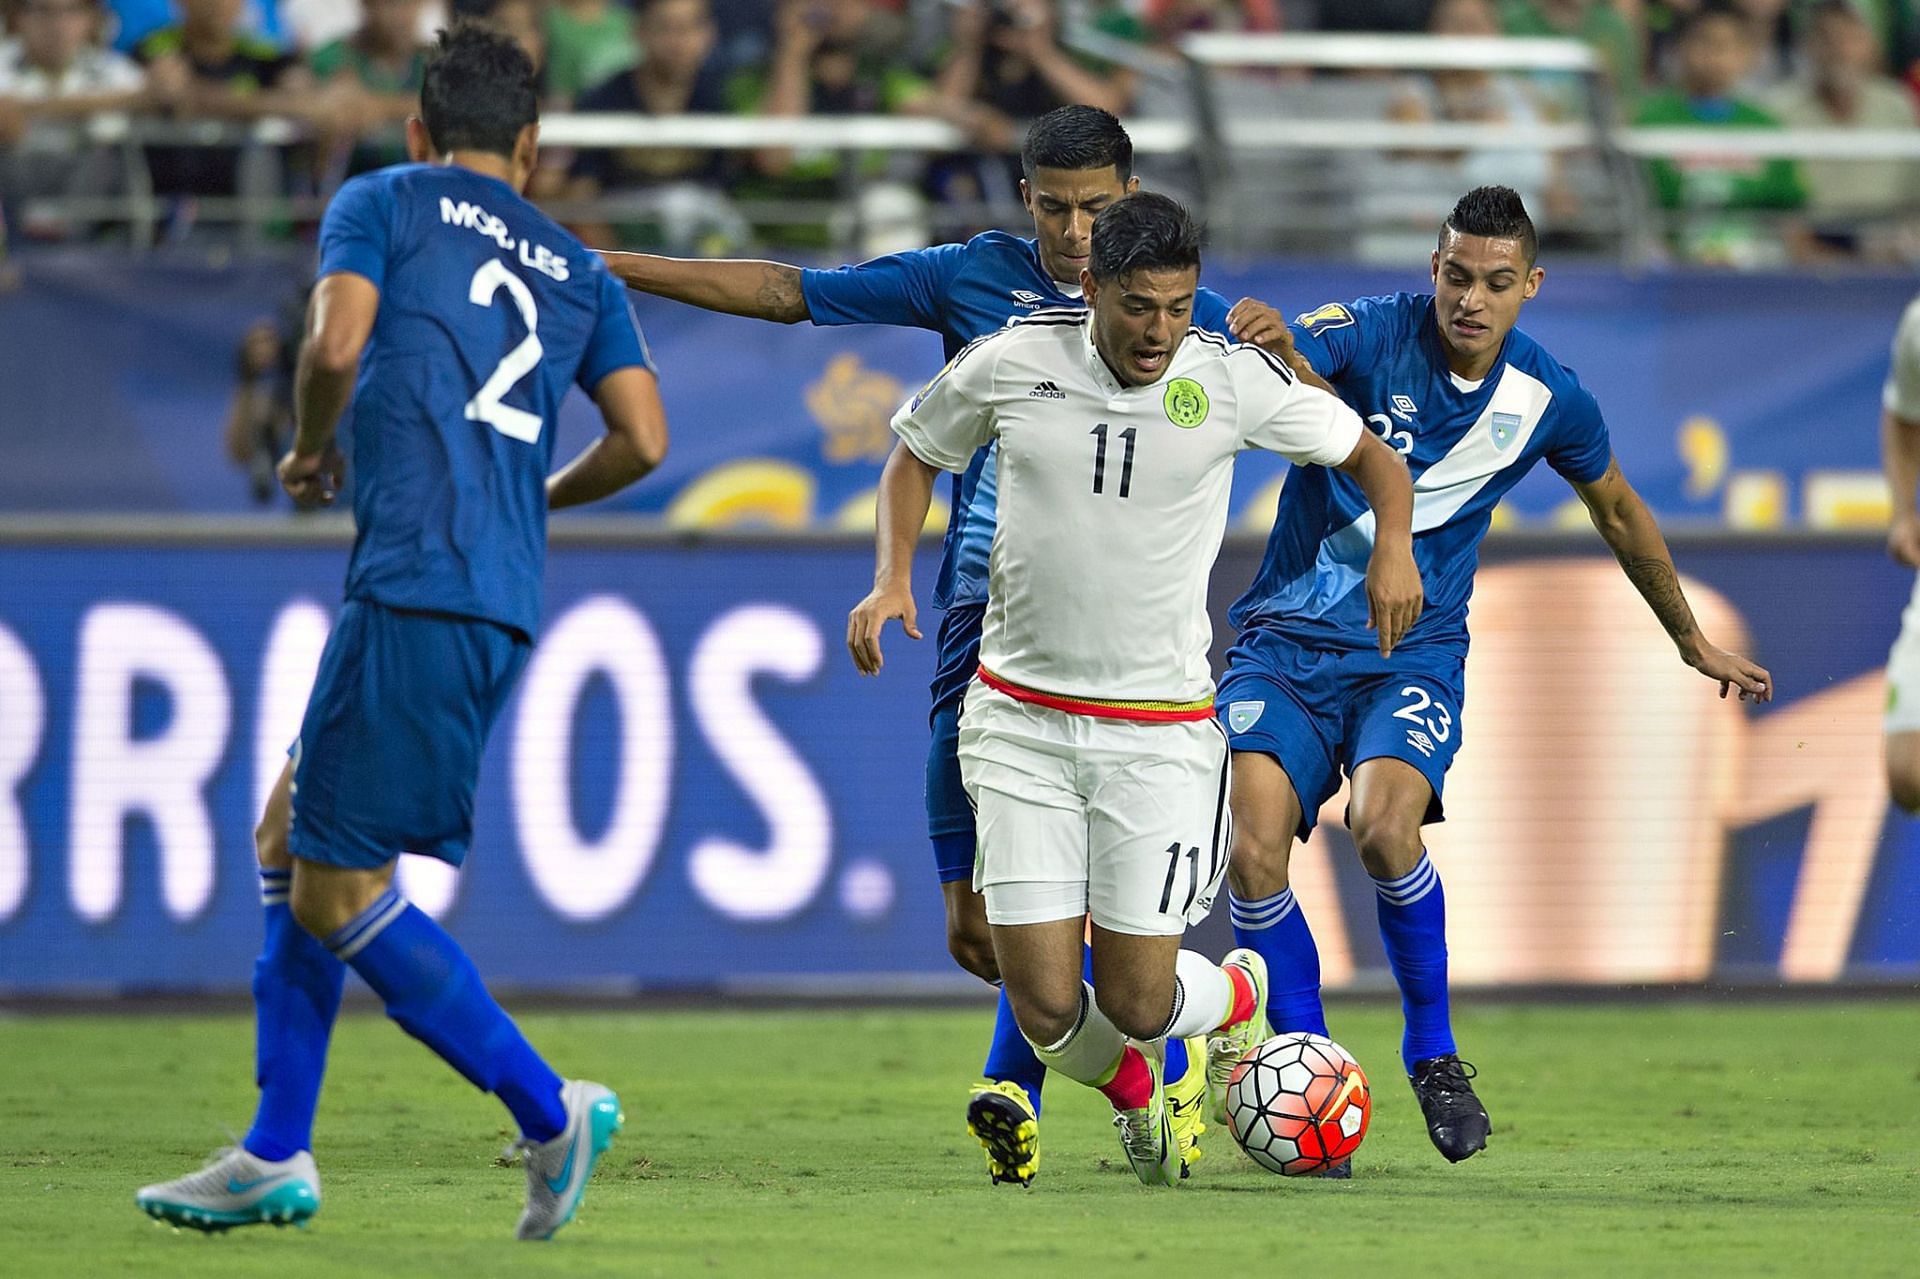 Mexico and Guatemala will square off in an international friendly on Wednesday.